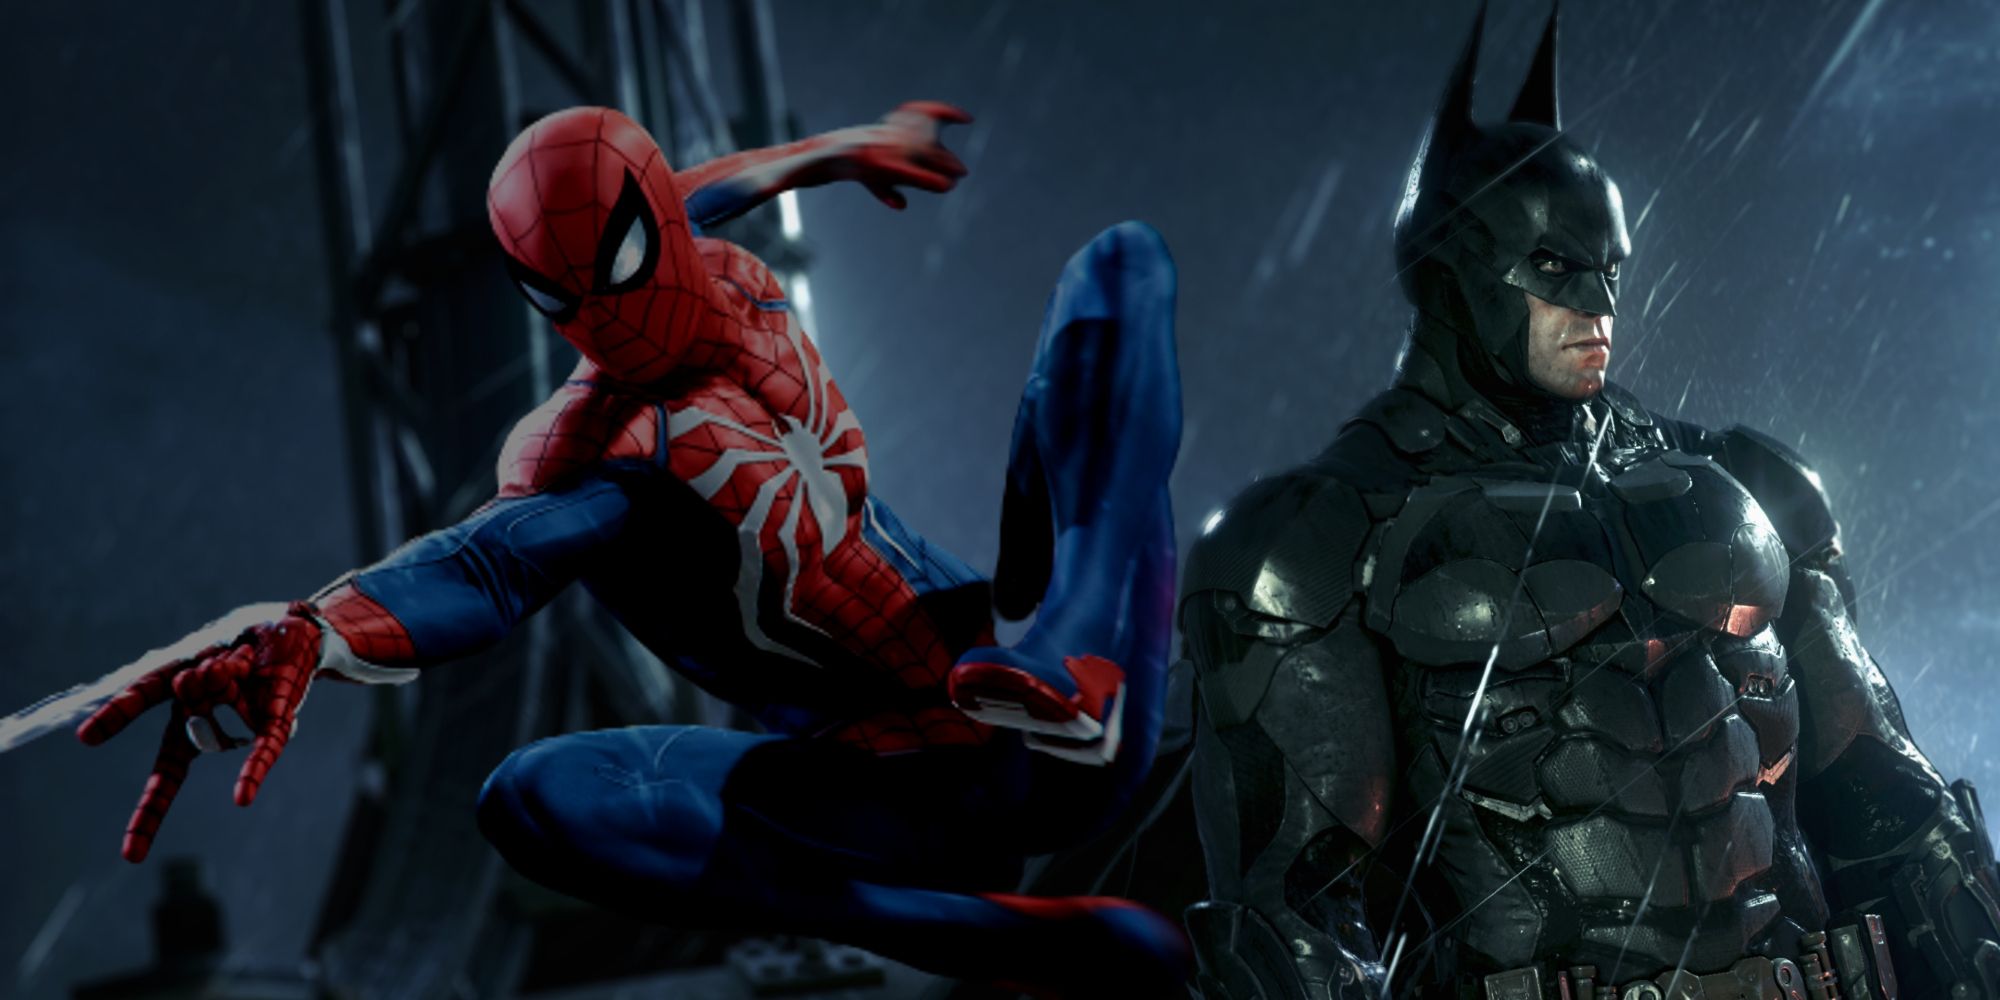 10 Ways The Marvel's Spider-Man Games Are Just Like The Arkham Games